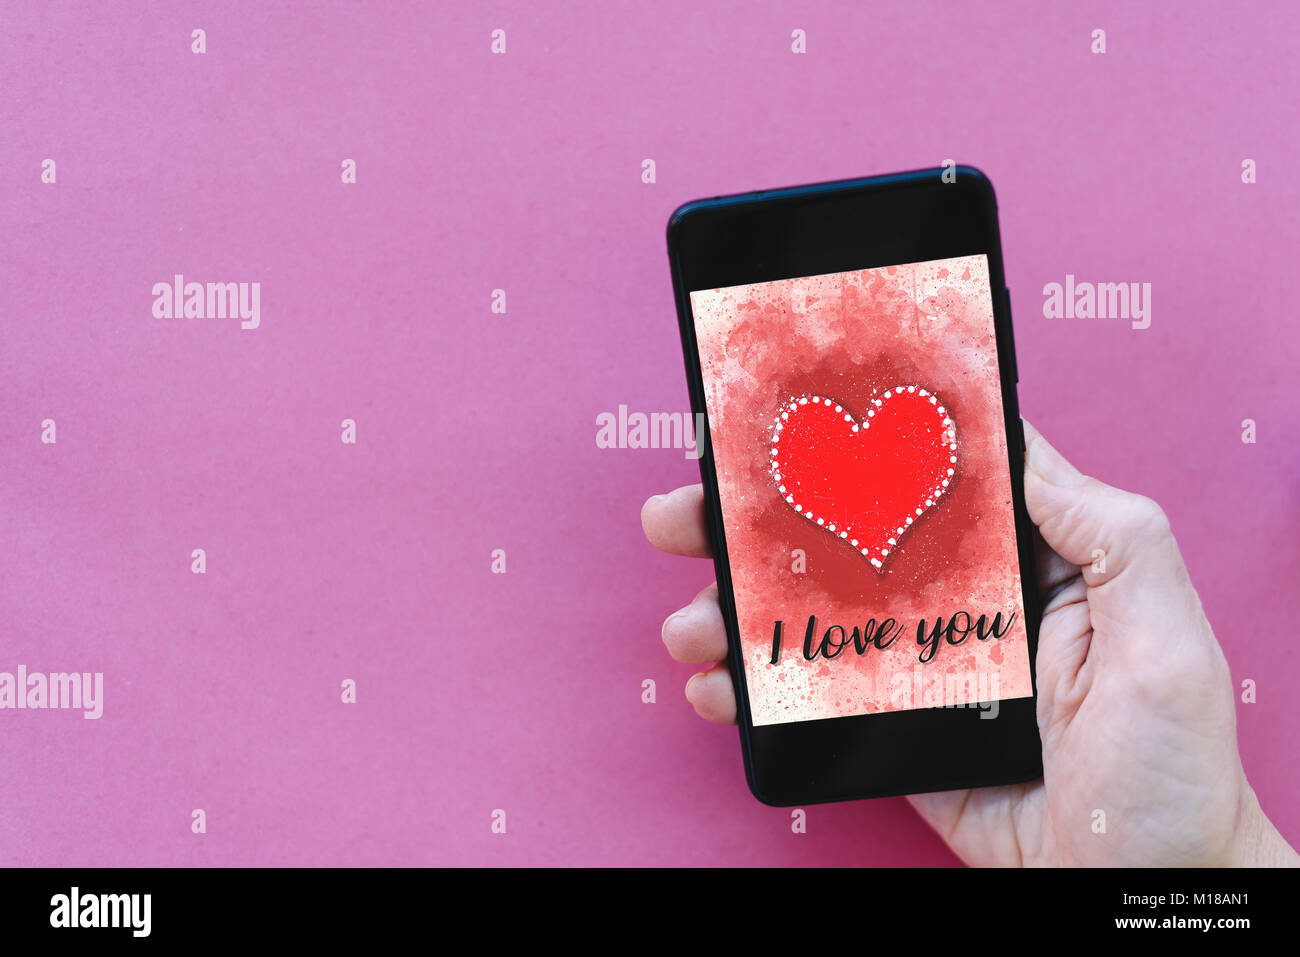 Valentines day sale background with heart illustration with the words I Love You on smartphone screen mockup on pink background with woman hand holdin Stock Photo